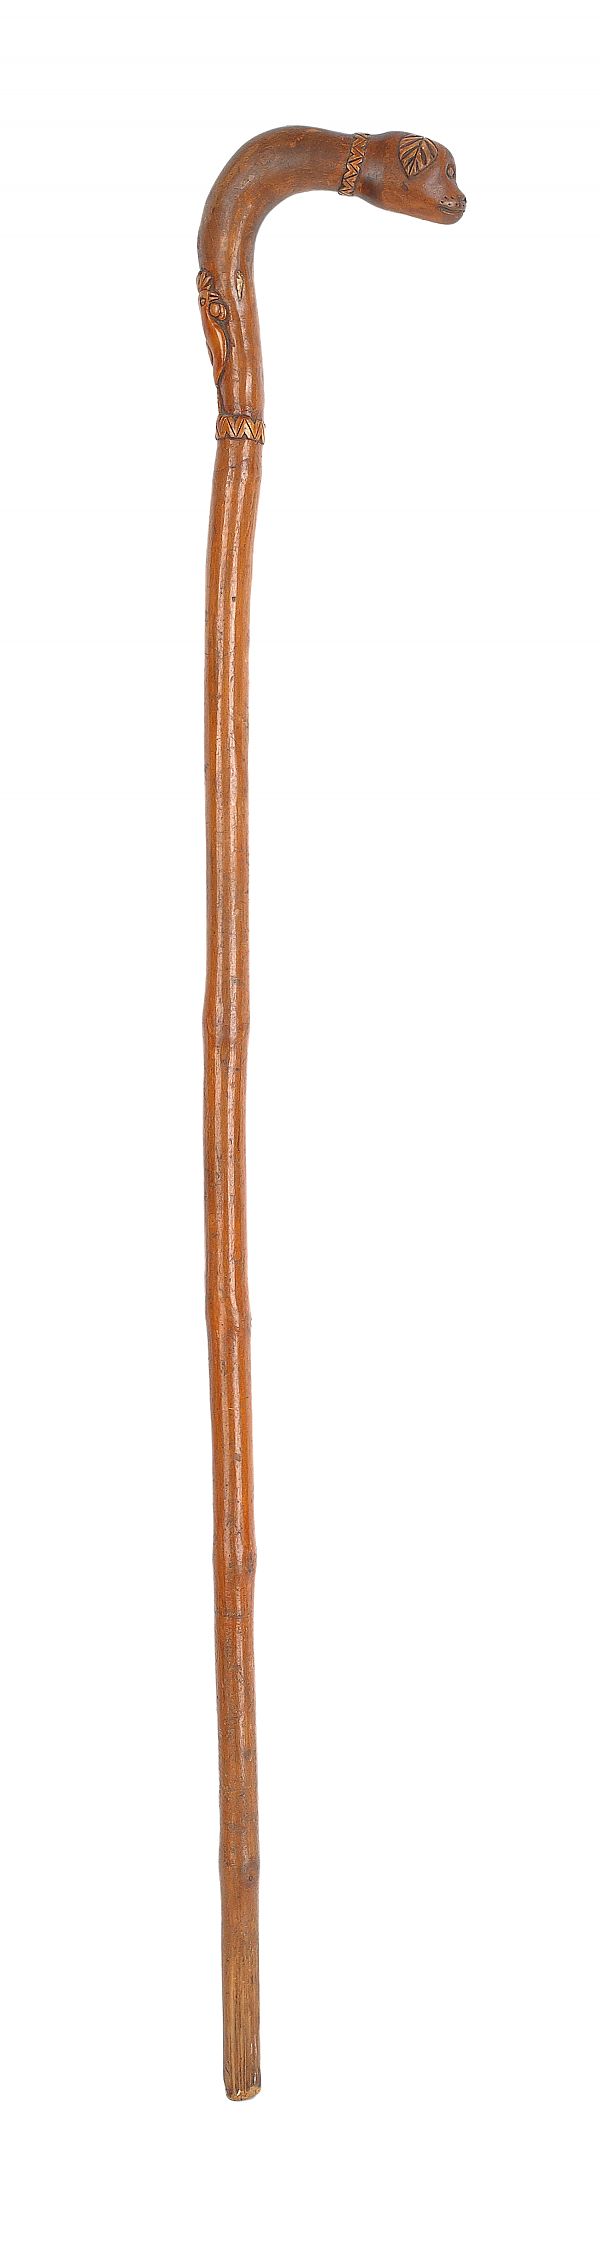 Pennsylvania carved cane late 19th